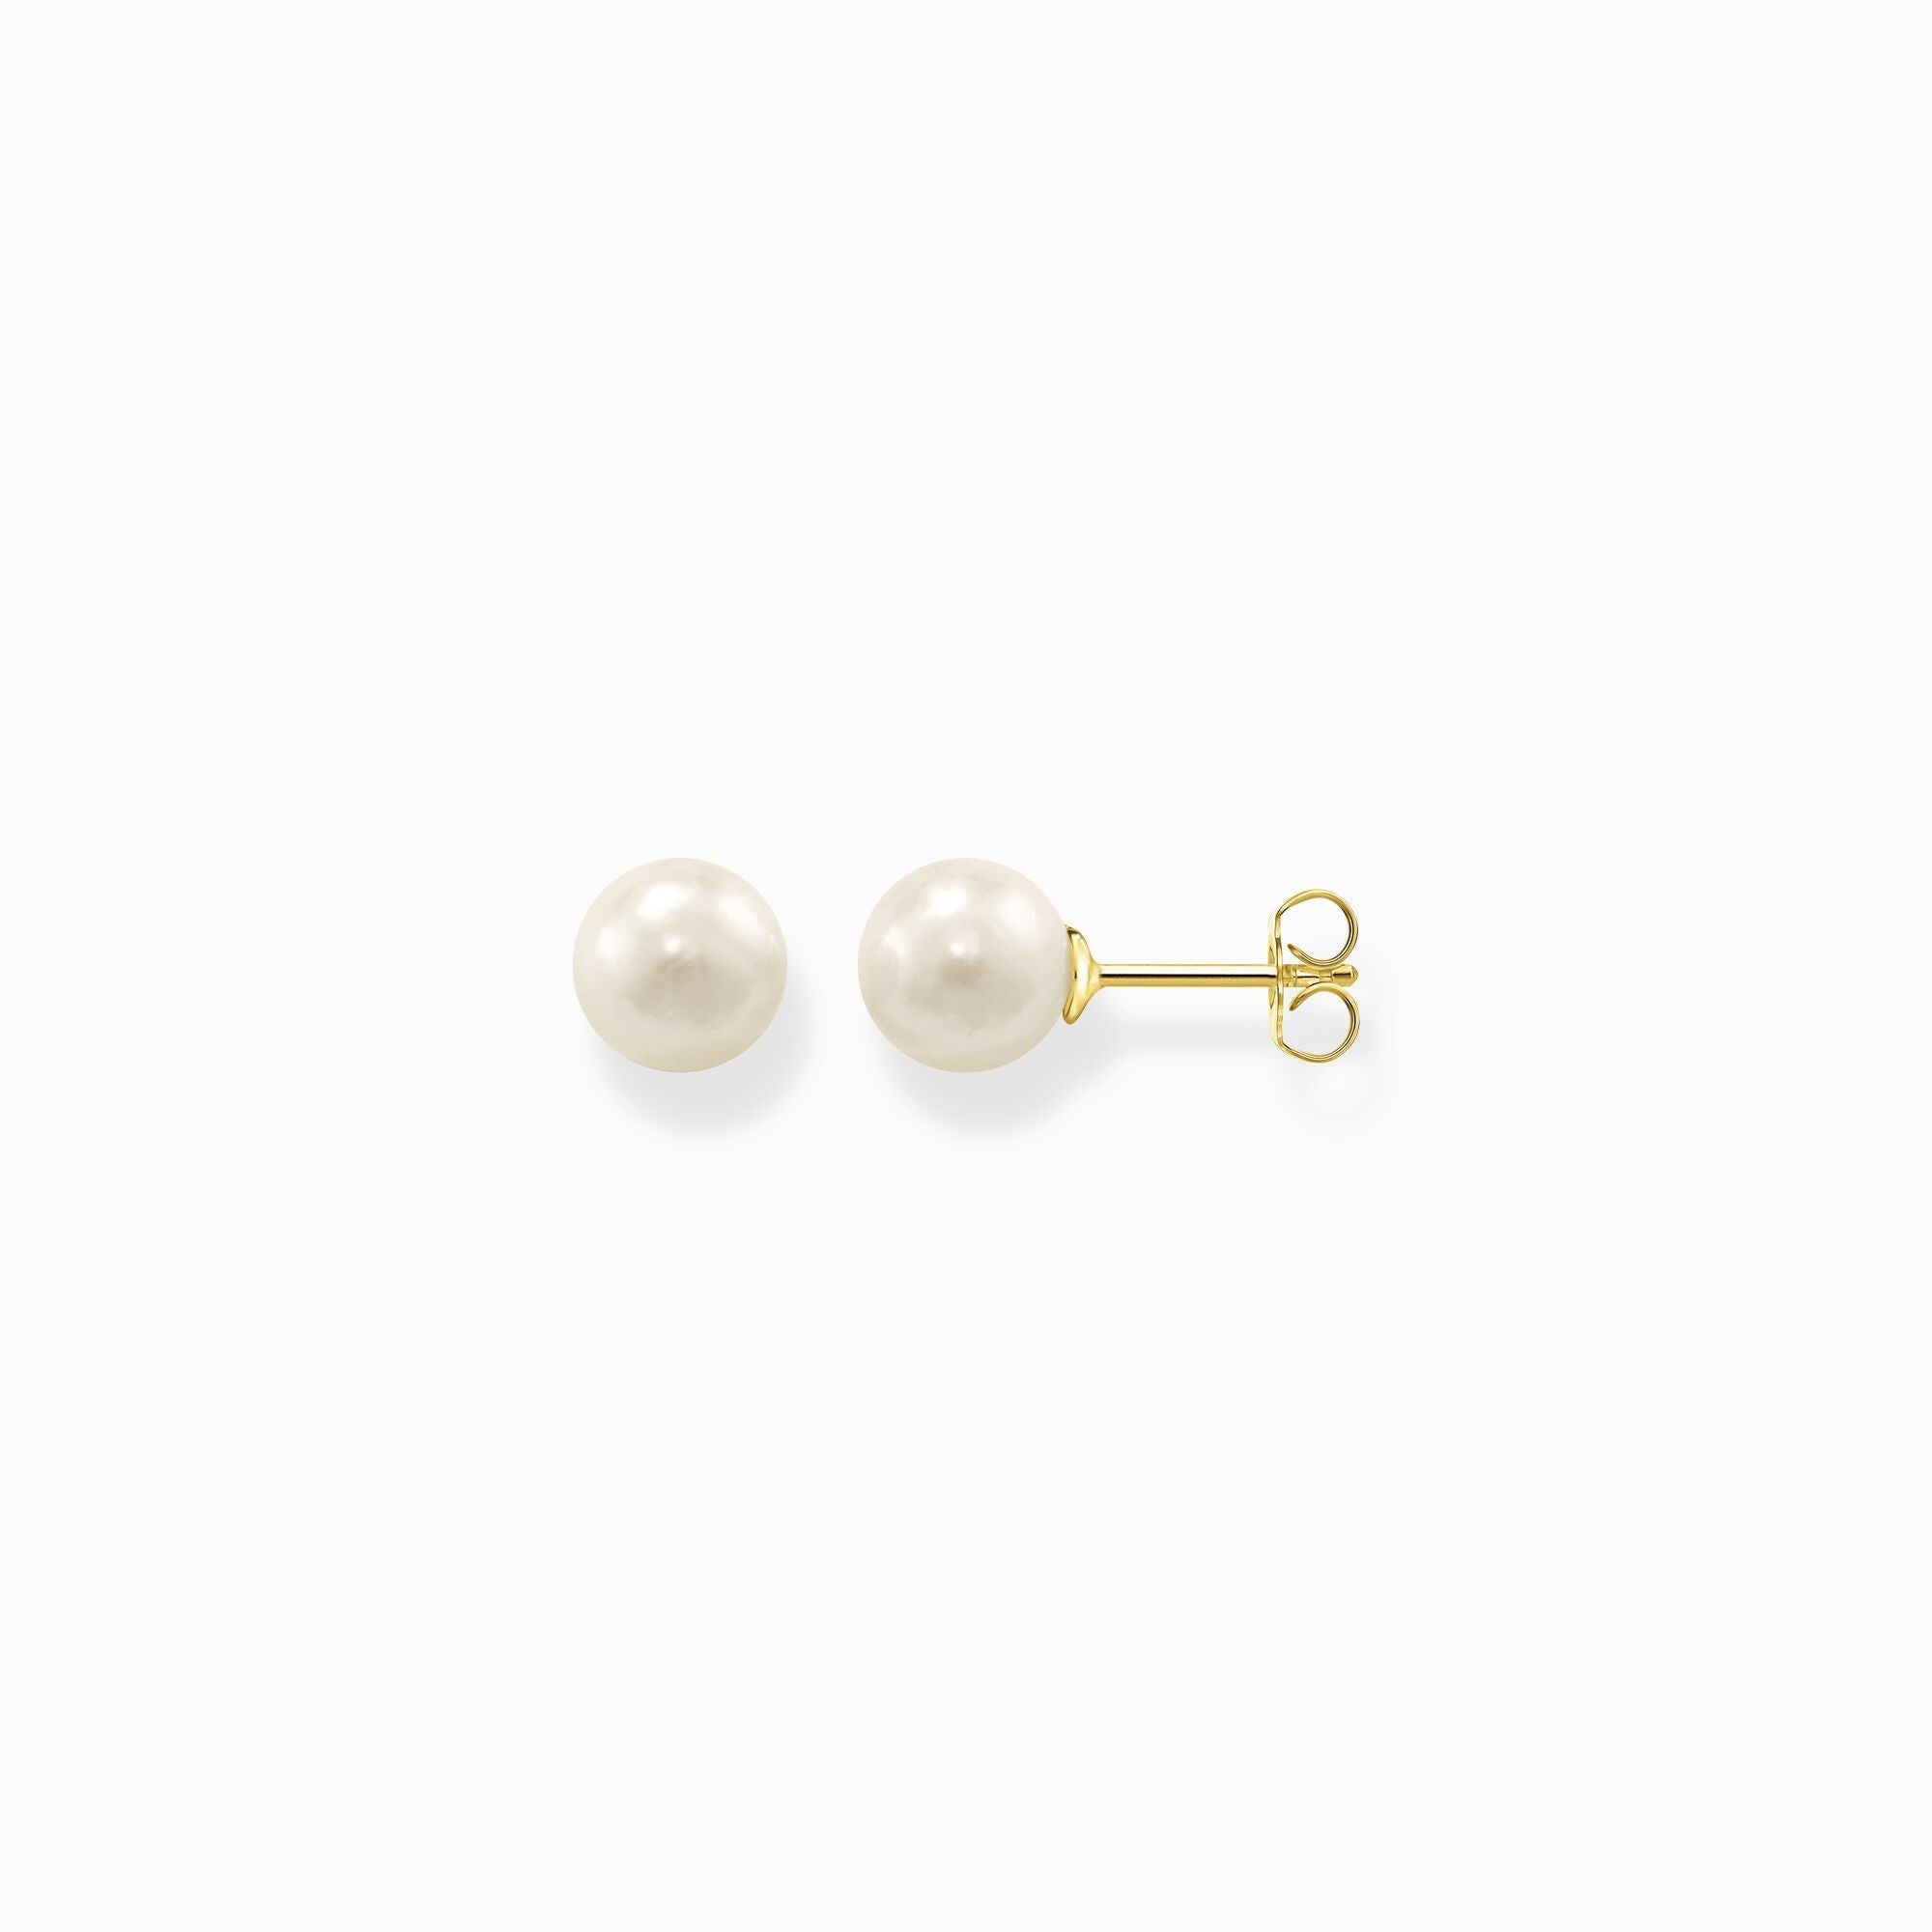 Thomas Sabo Gold Plated Sterling Silver Pearl Stud Earrings